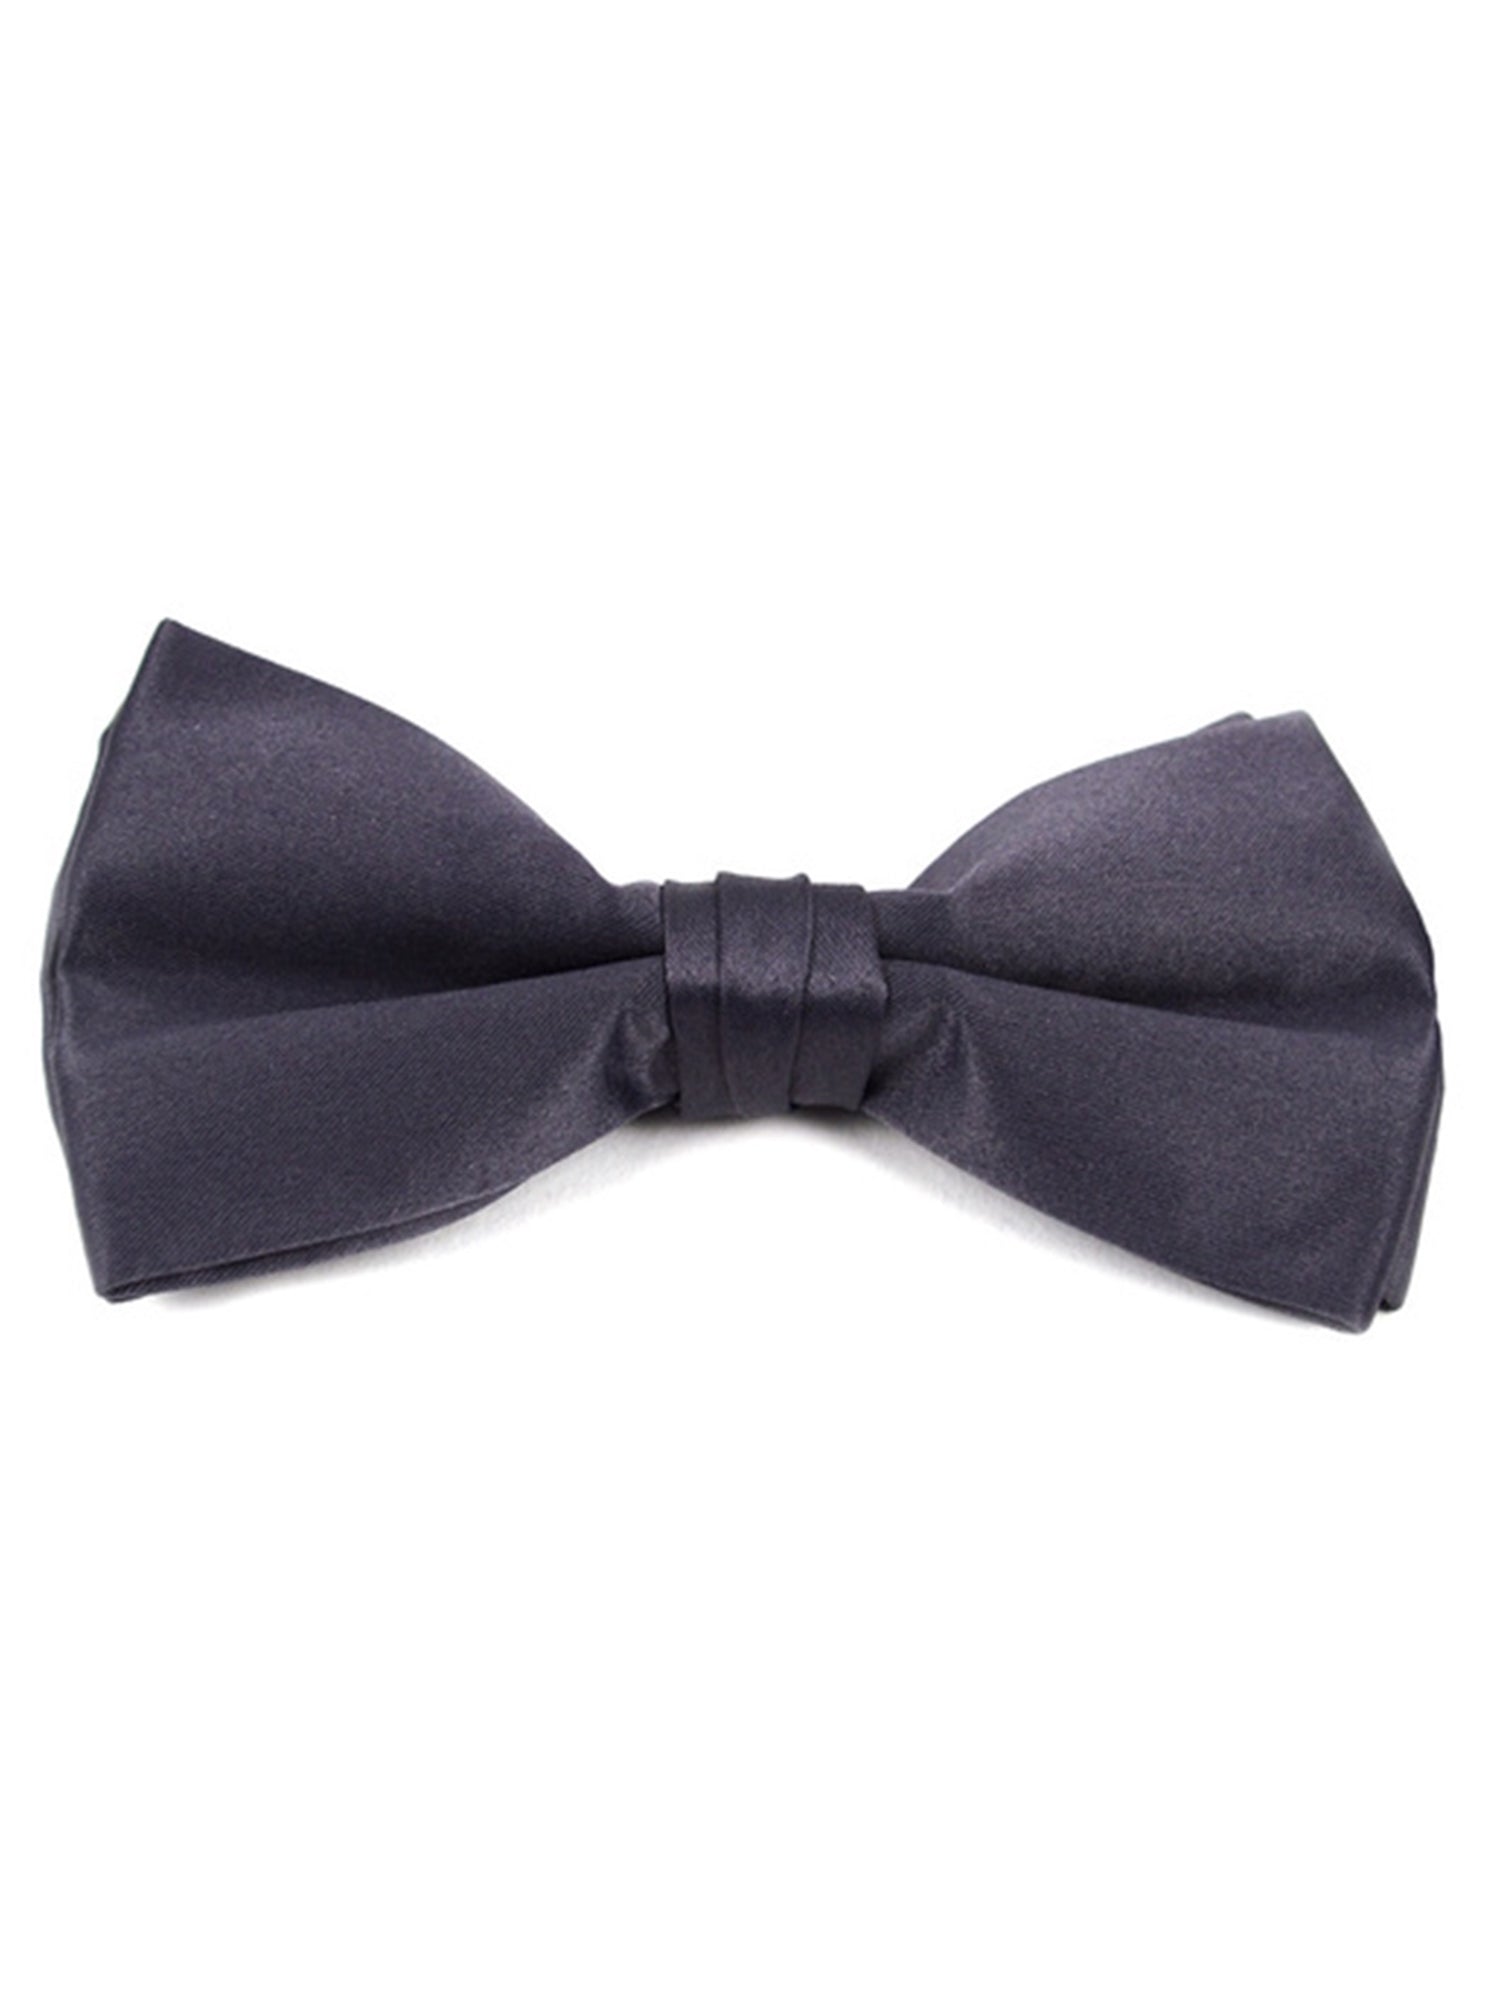 Young Boy's Pre-tied Clip On Bow Tie - Formal Tuxedo Solid Color Boy's Solid Color Bow Tie TheDapperTie Charcoal One Size 